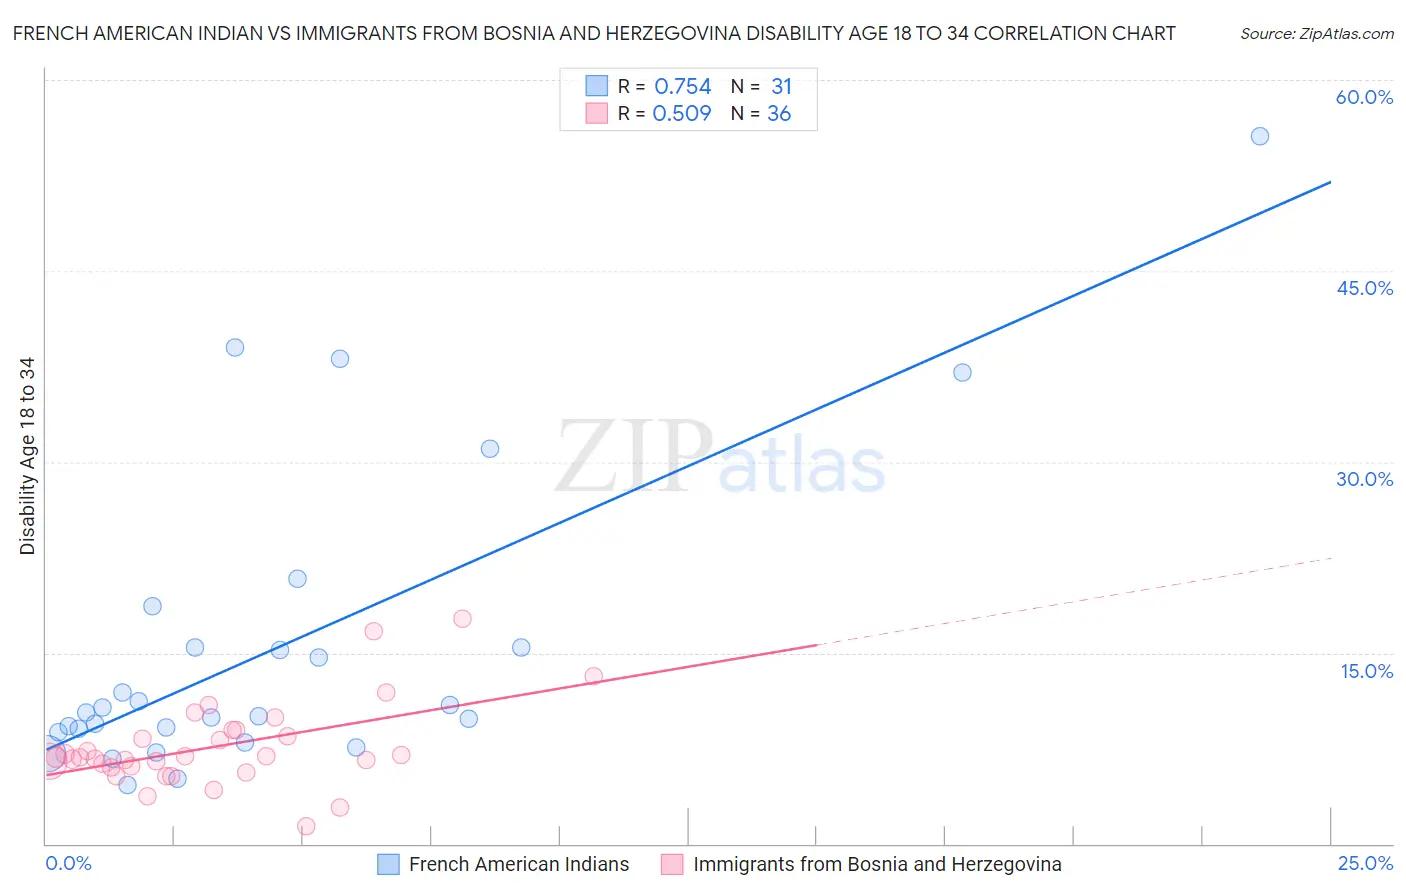 French American Indian vs Immigrants from Bosnia and Herzegovina Disability Age 18 to 34